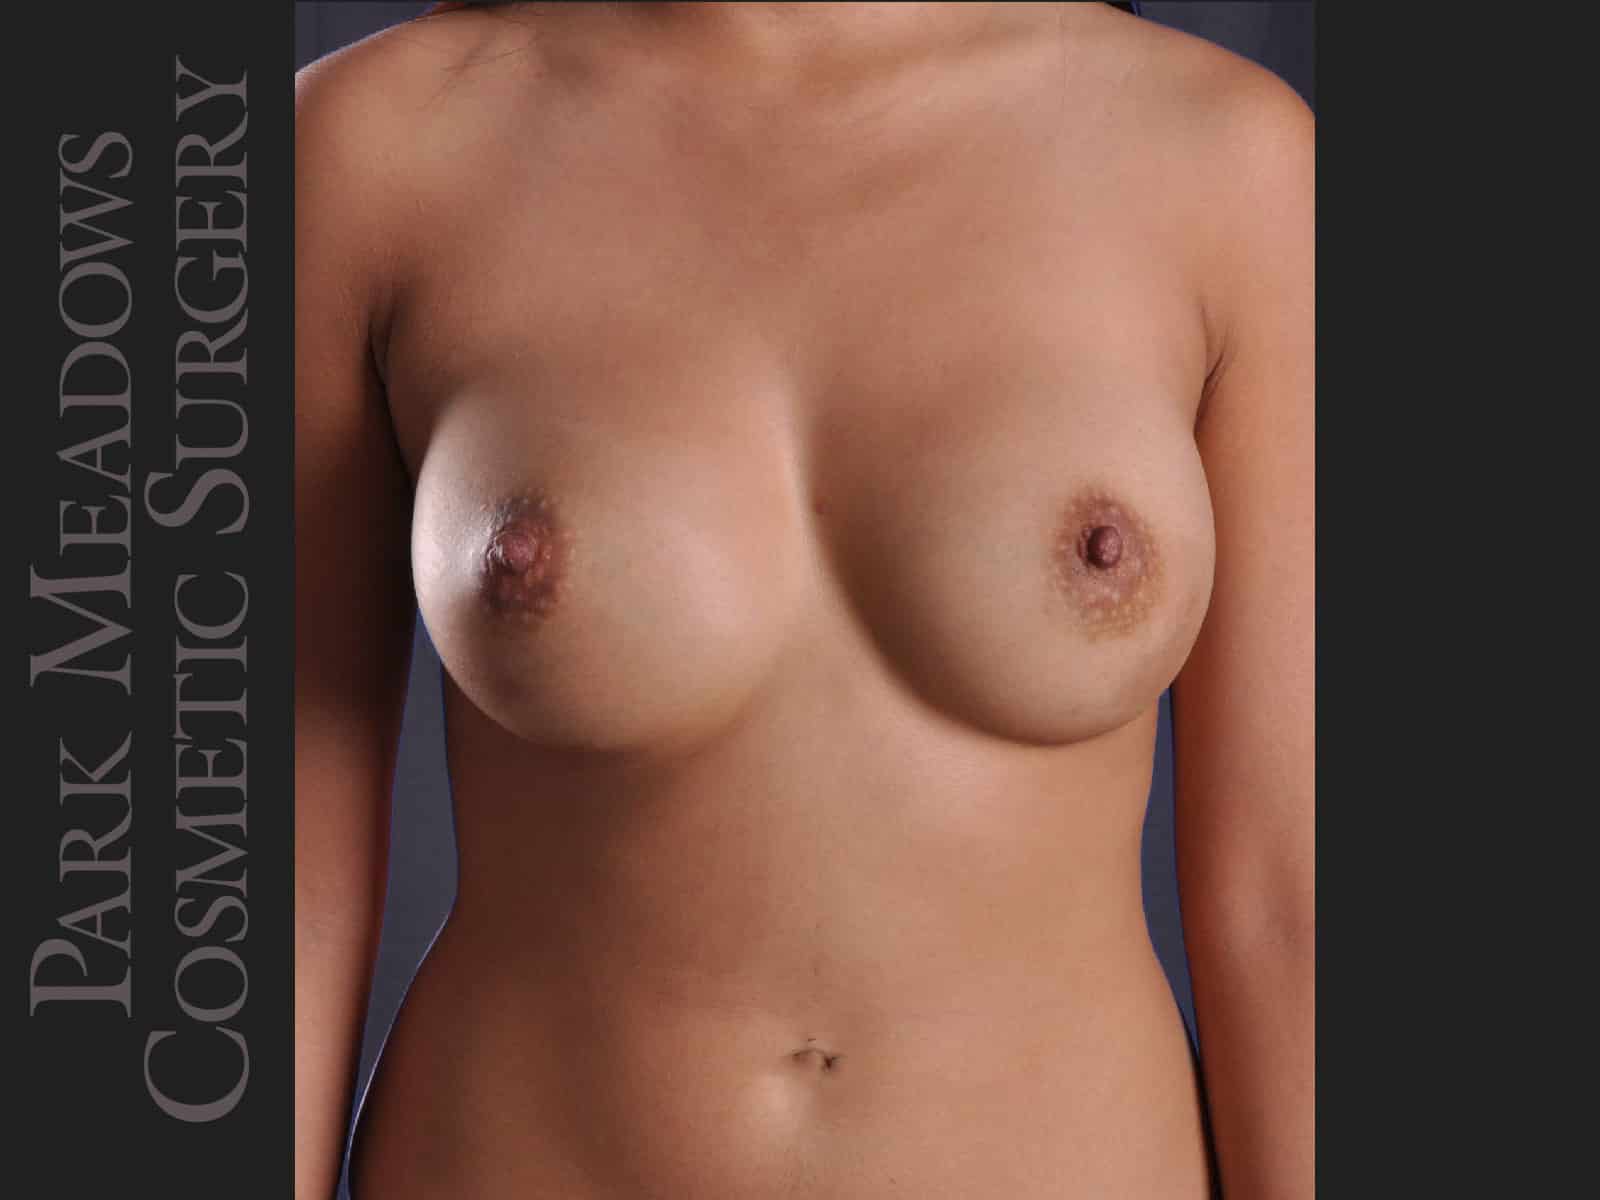 Saline Breast Augmention; (R) 300cc implants filled to 350cc & (L) 300cc implants  filled to 325cc